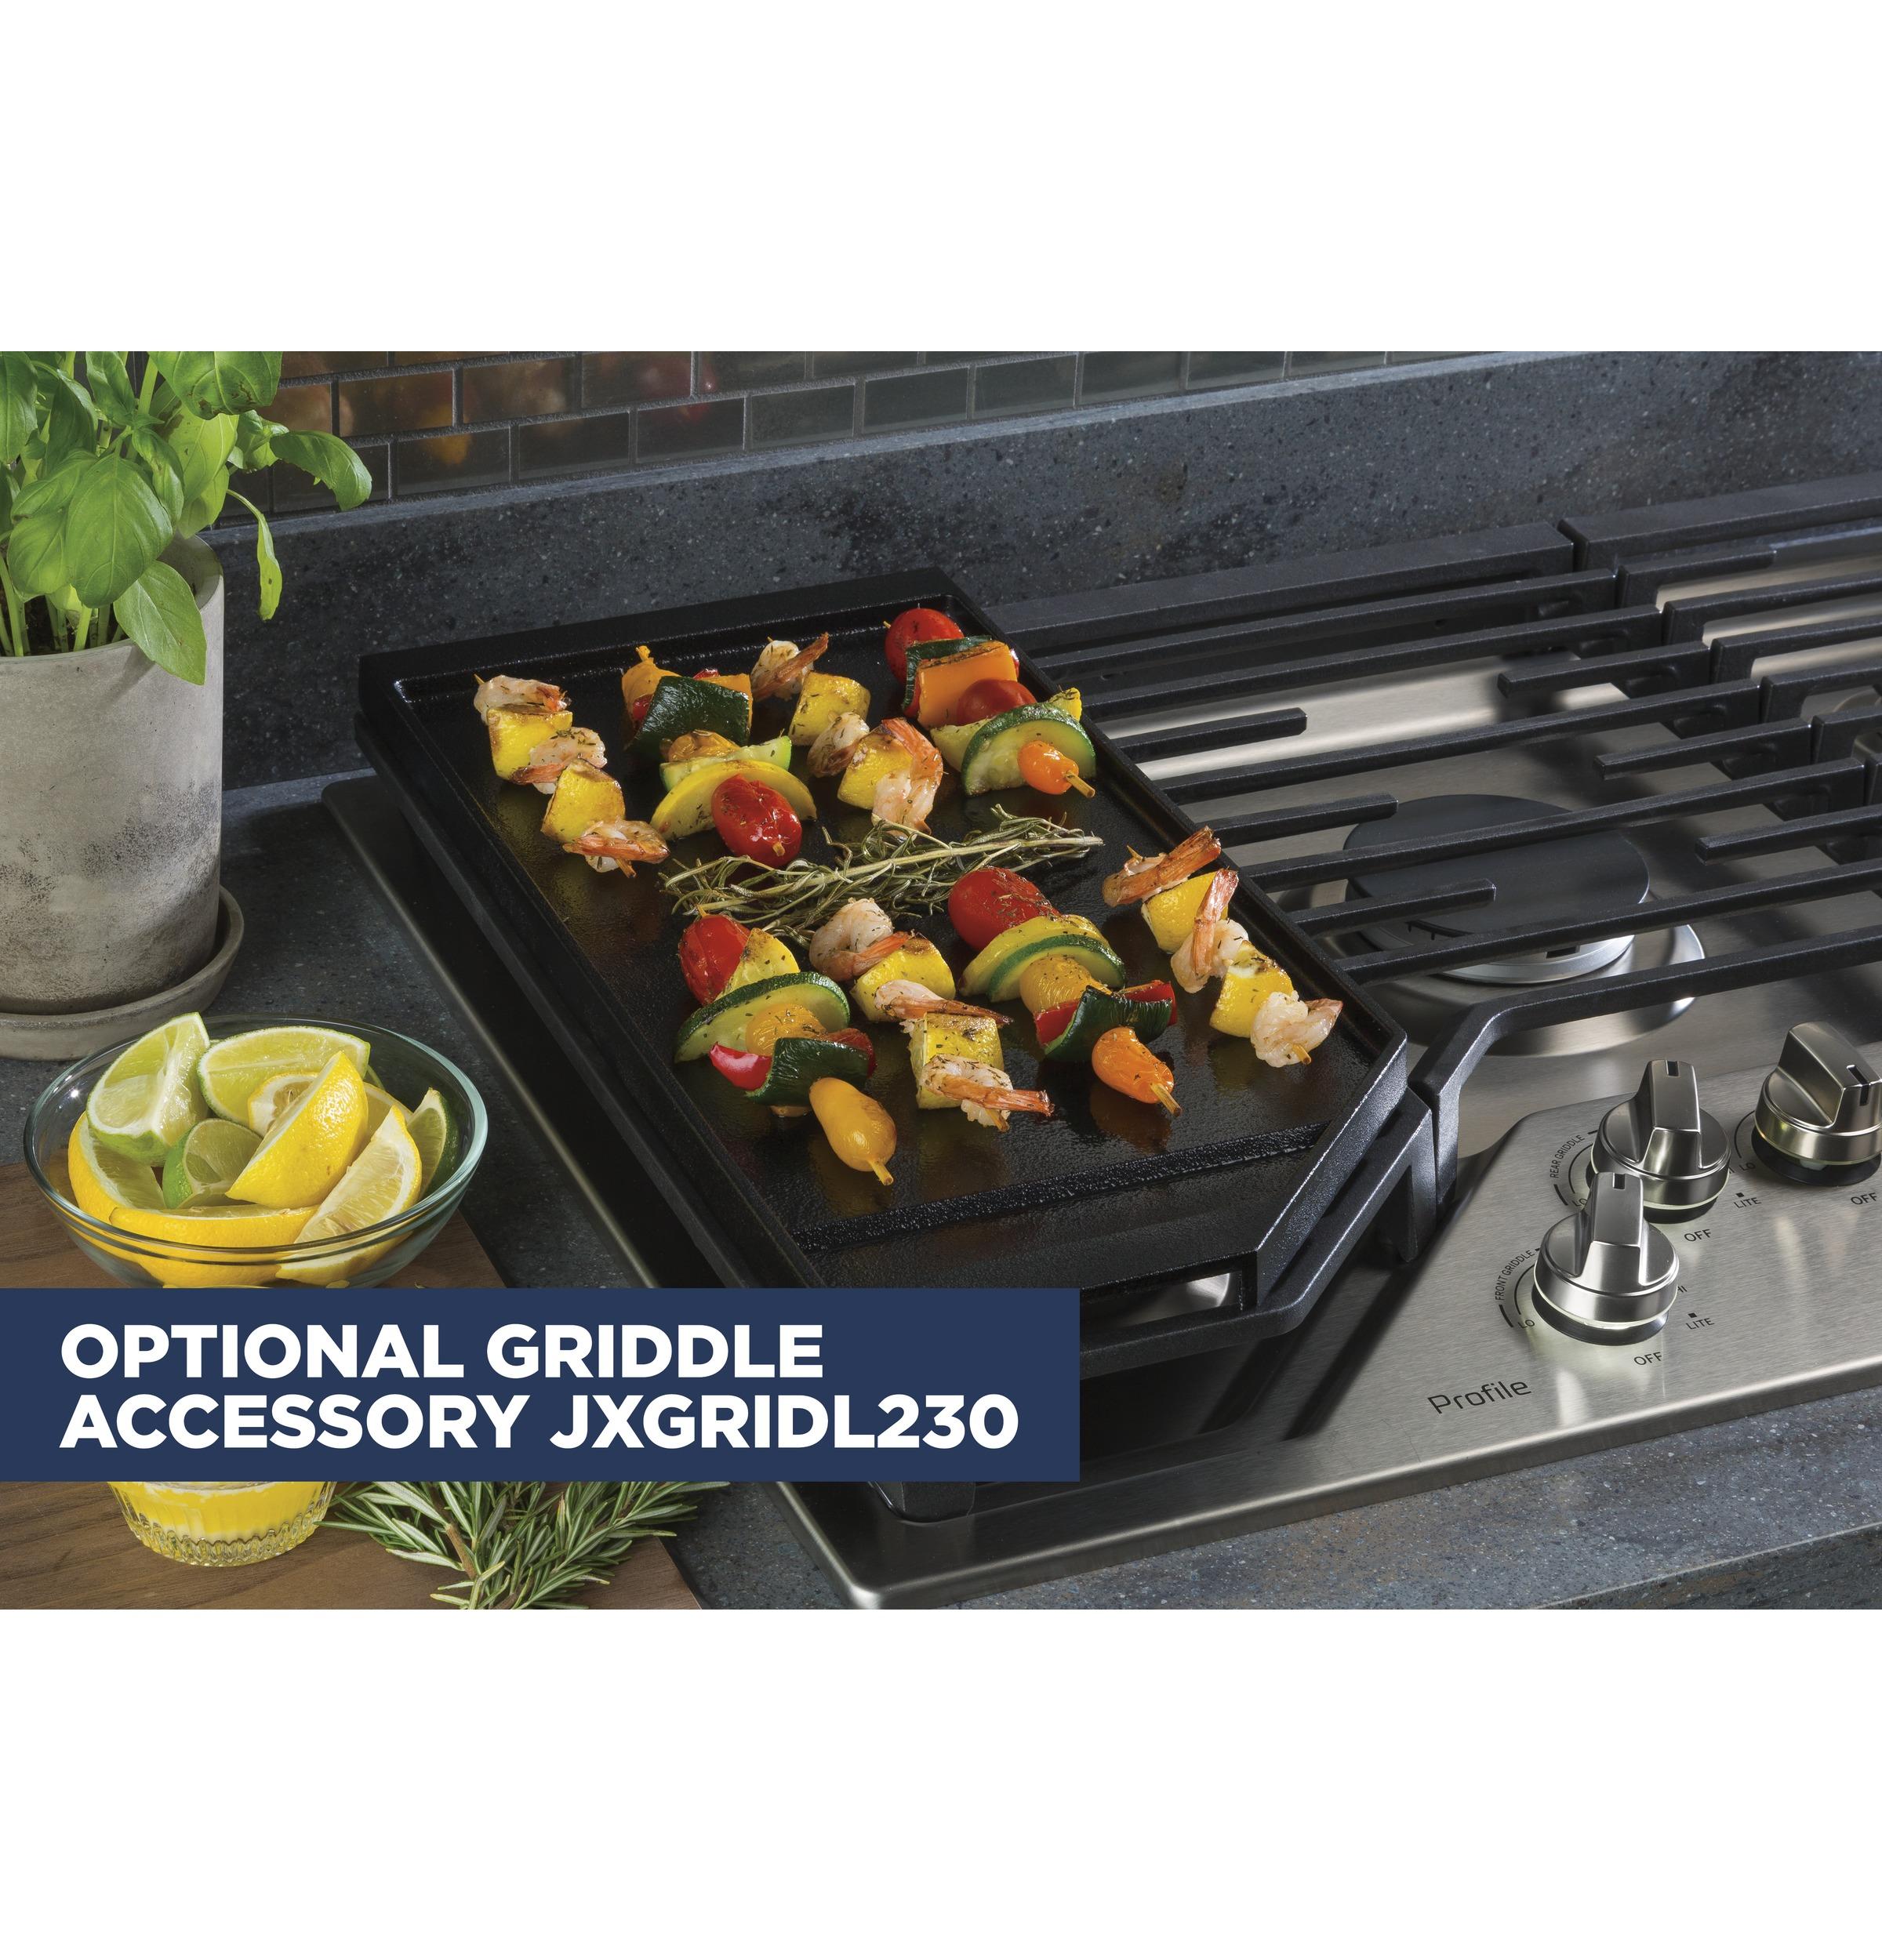 GE Profile™ 30" Built-In Gas Cooktop with 5 Burners